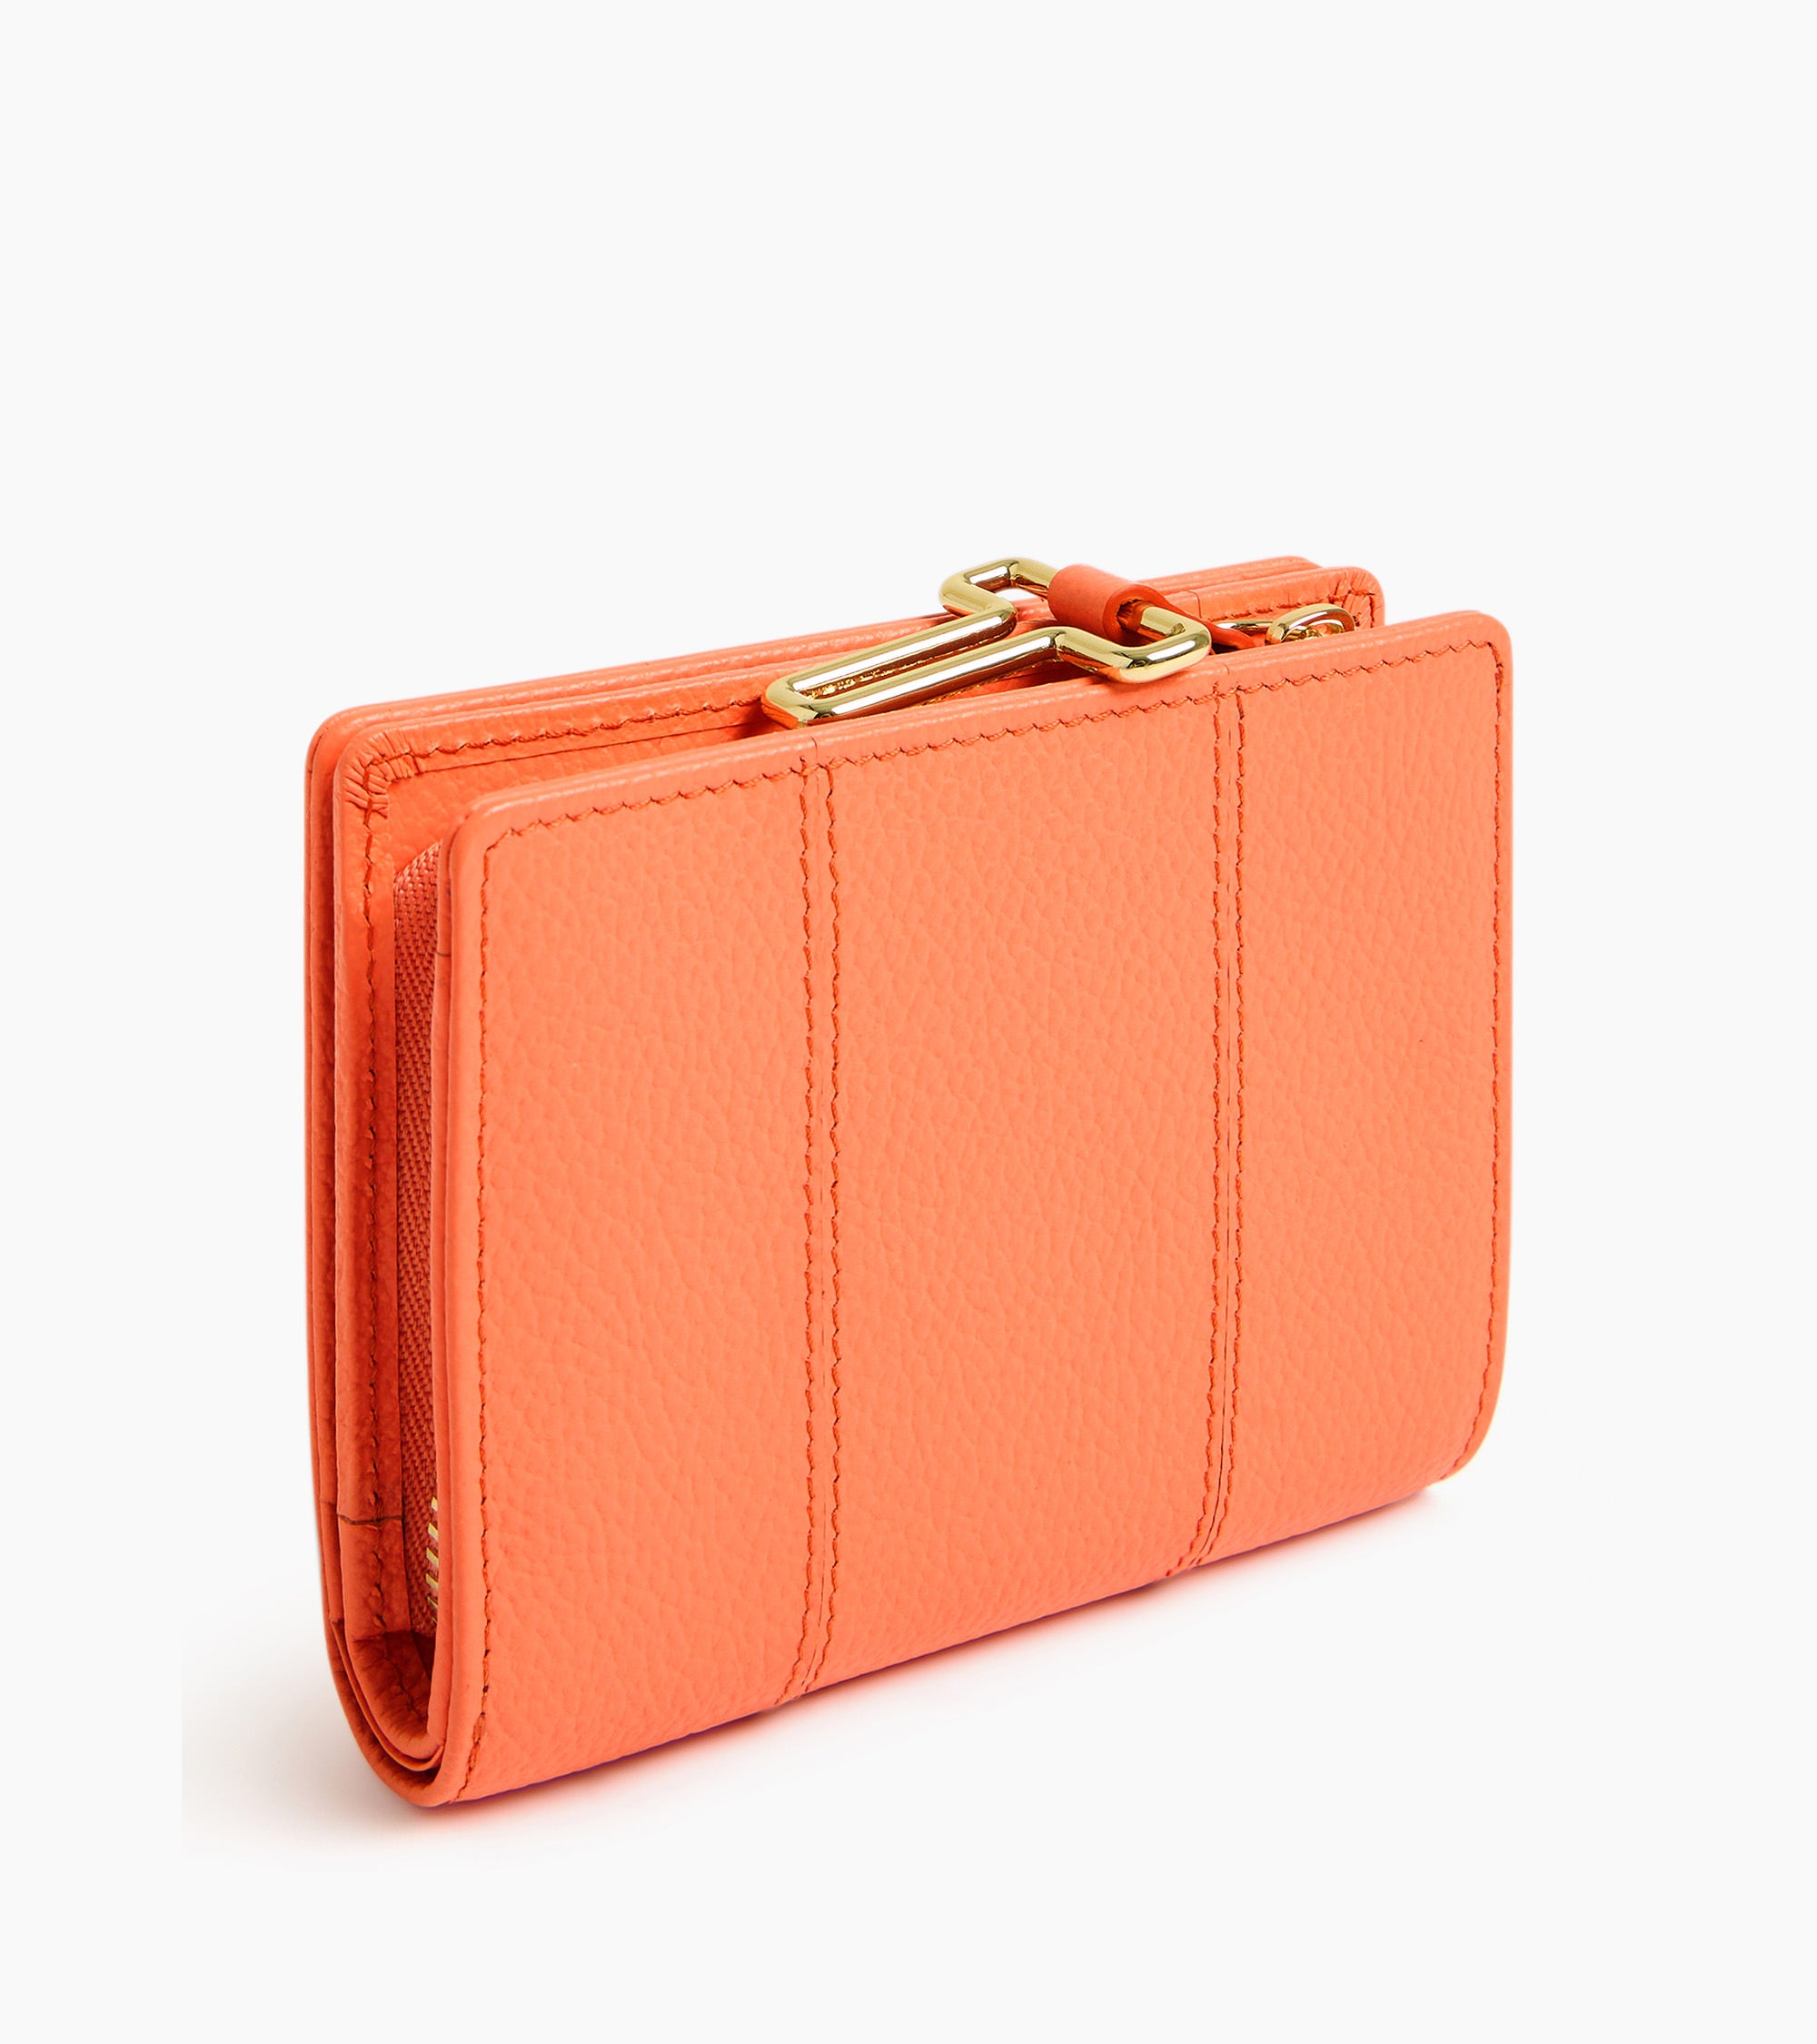 Juliette small grained leather purse